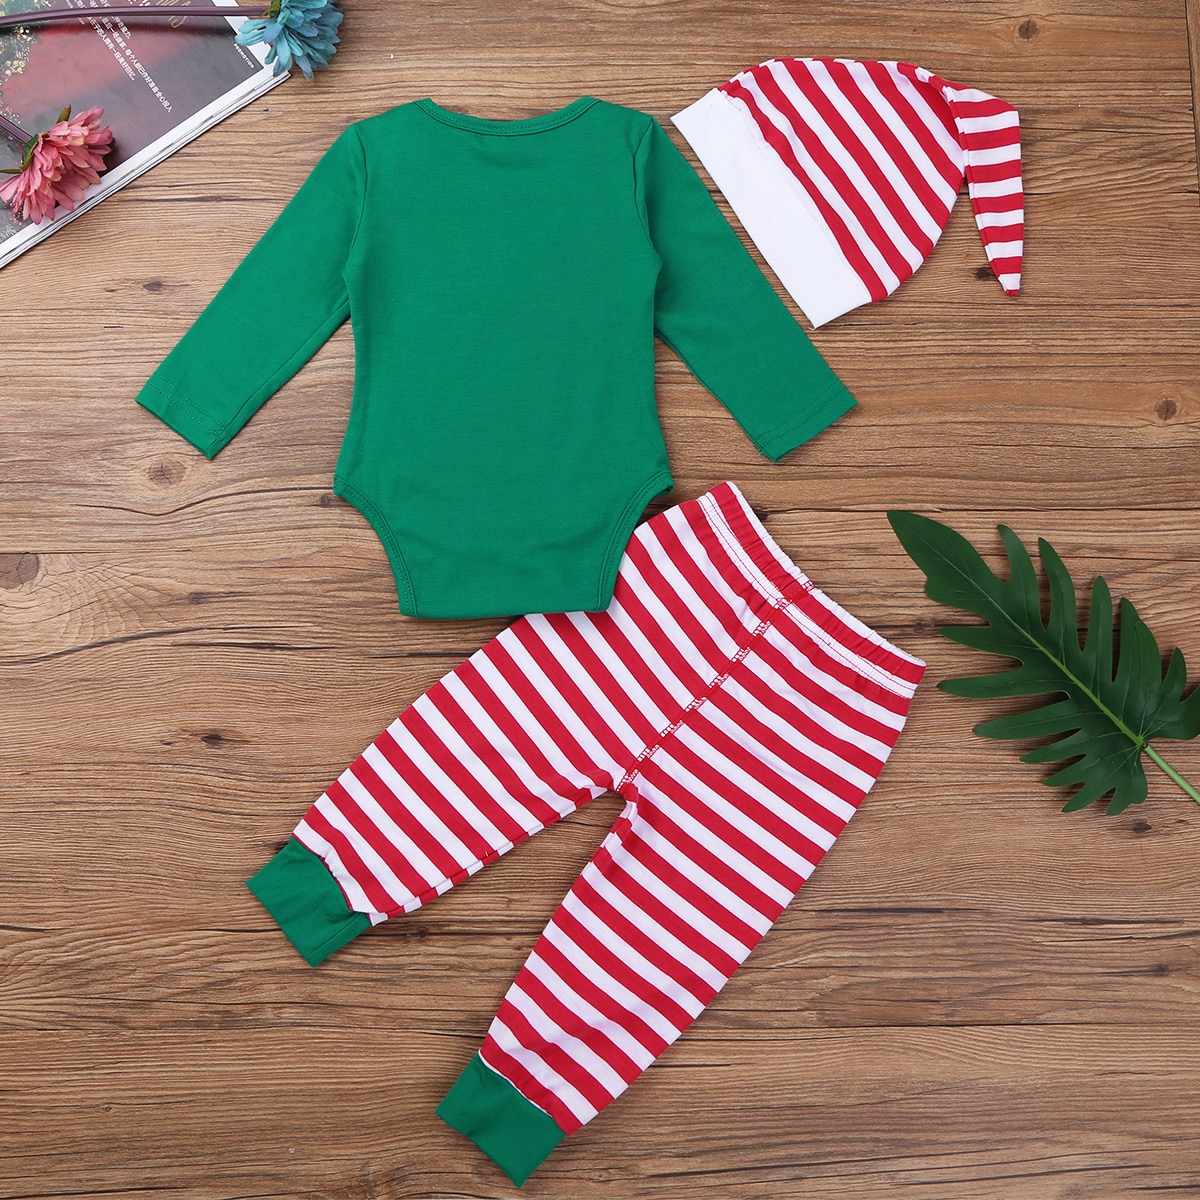 Baby-Boy-Girl-Autumn-Christmas-Xmas-Clothes-Set-Toddler-Baby-Boys-Girls-Romper-Pant-Hat-Outfits-2